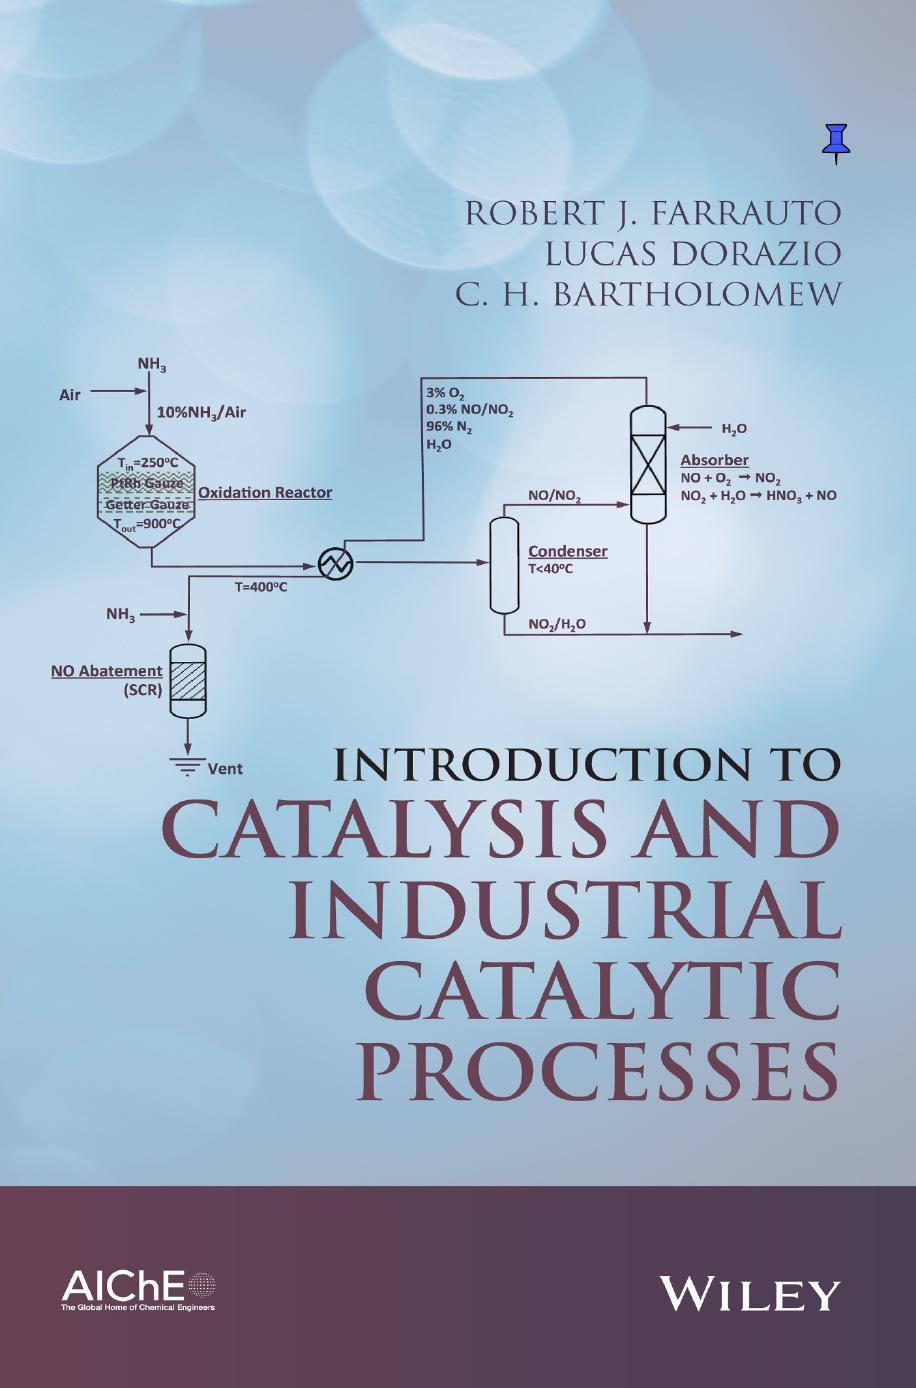 Introduction to Catalysis and Industrial Catalytic Processes 3rd Edition by Robert J. Farrauto , Lucas Dorazio  ,  C. H. Bartholomew